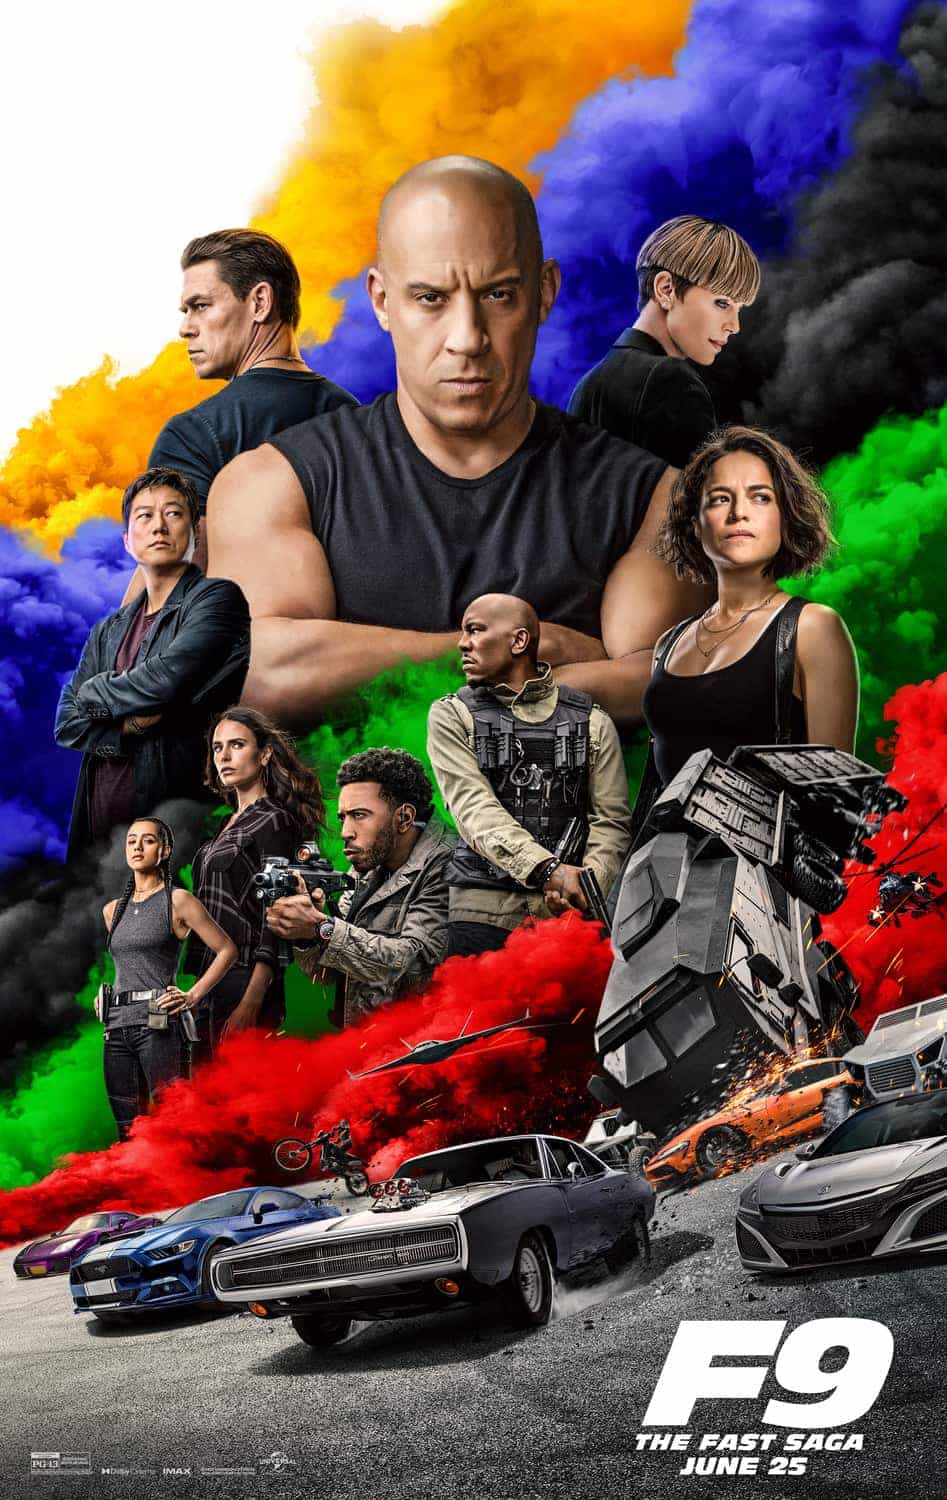 World Box Office Weekend Report 2nd - 4th July 2021:  Fast 9 stays at the top while Boss baby 2 is the top new movie at 3